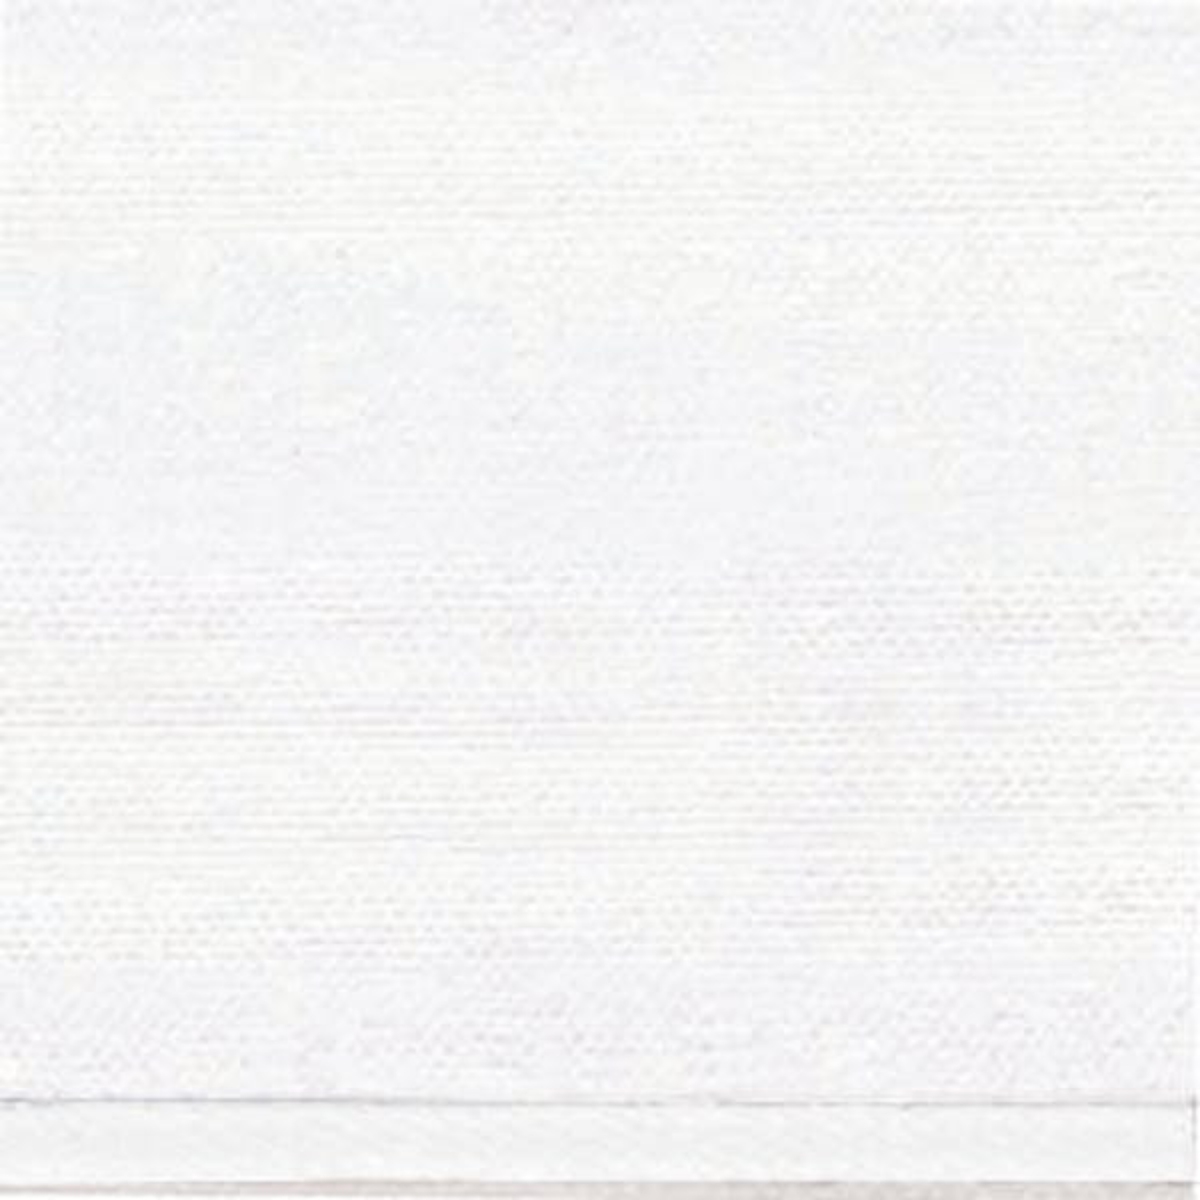 Swatch Sample of Matouk Bryant Bedding in White Color